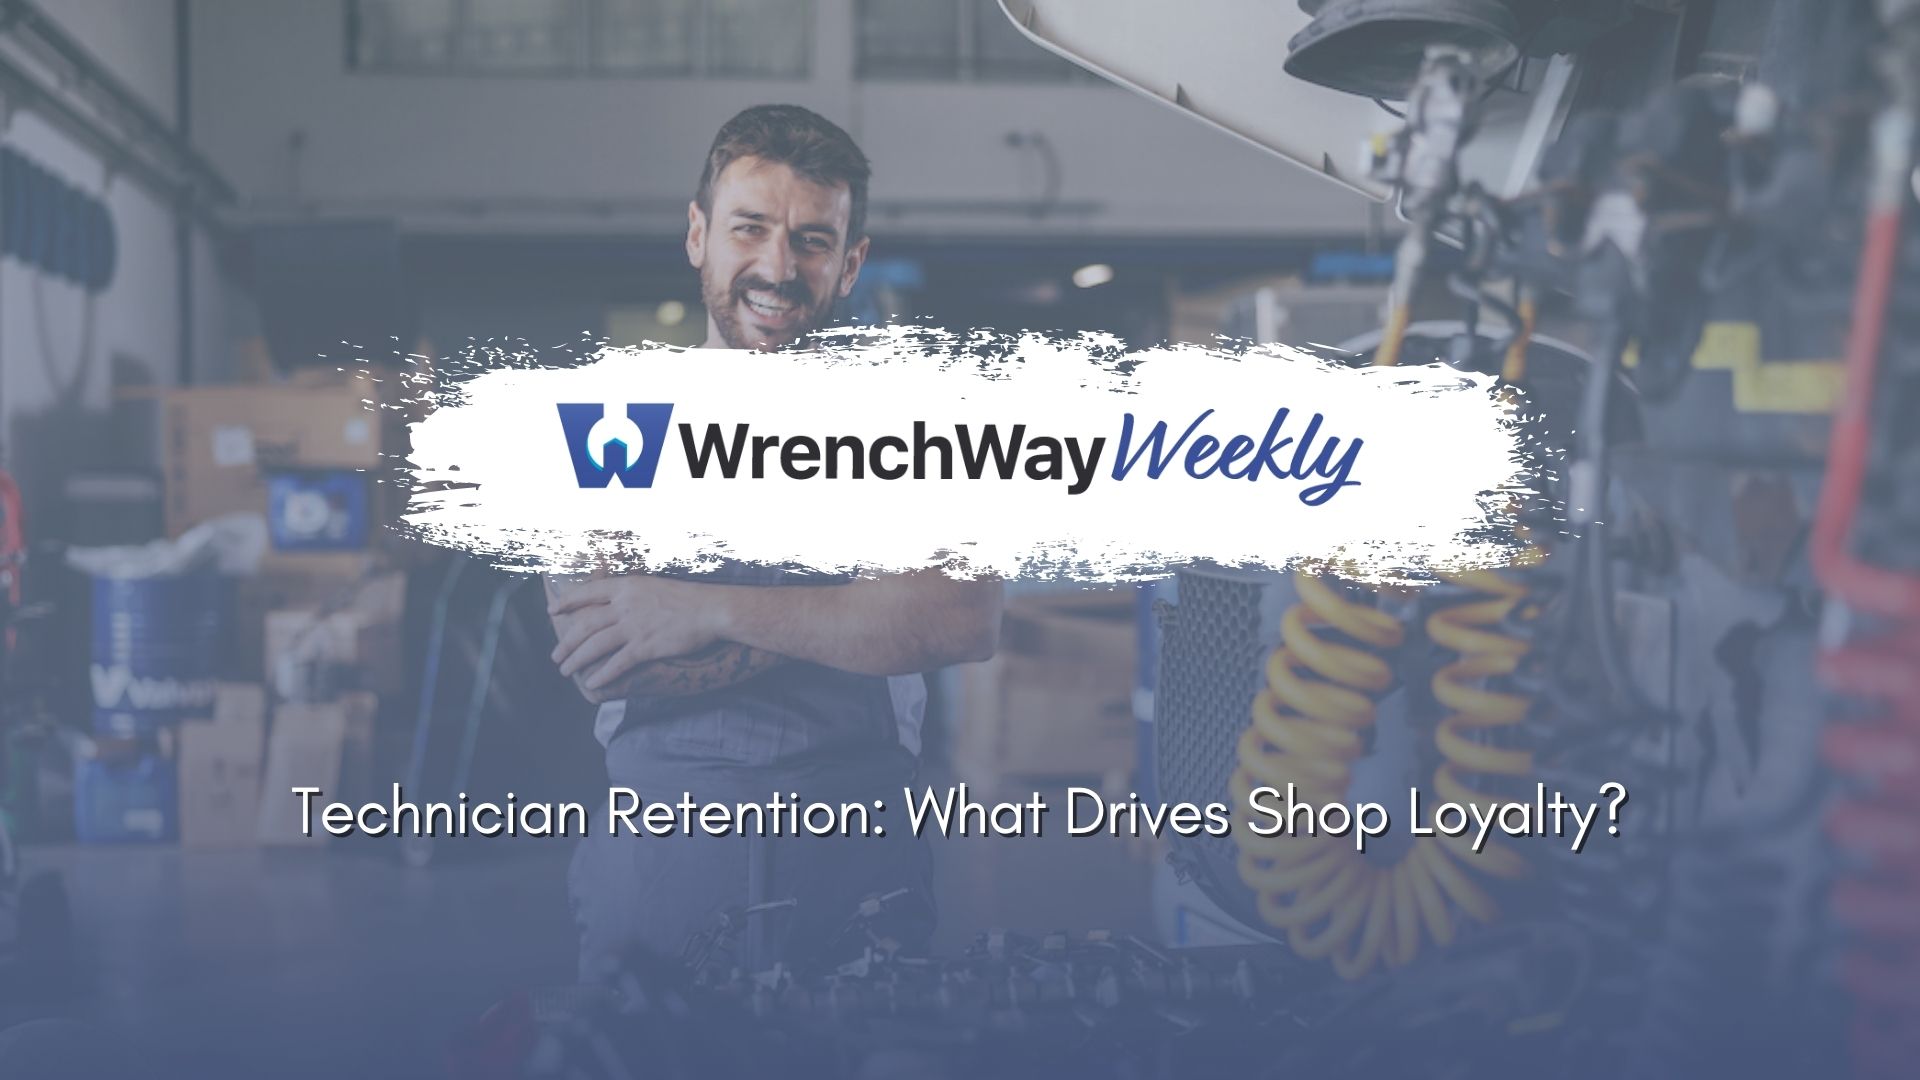 wrenchway weekly episode on technician retention: what drives shop loyalty